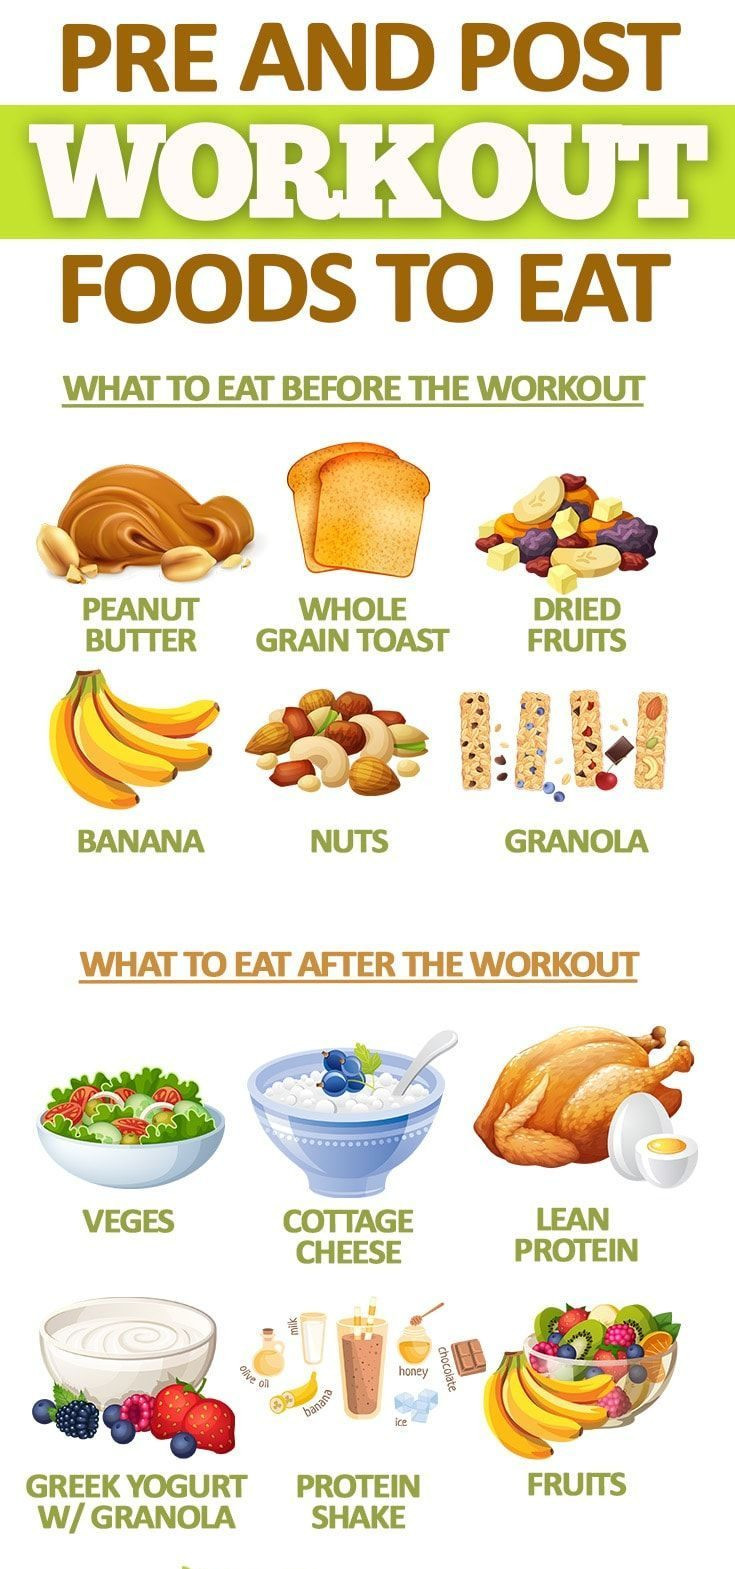 Healthy Snacks After Workout
 Top 10 Best Post Workout Foods for Fast Recovery LoveMyDL